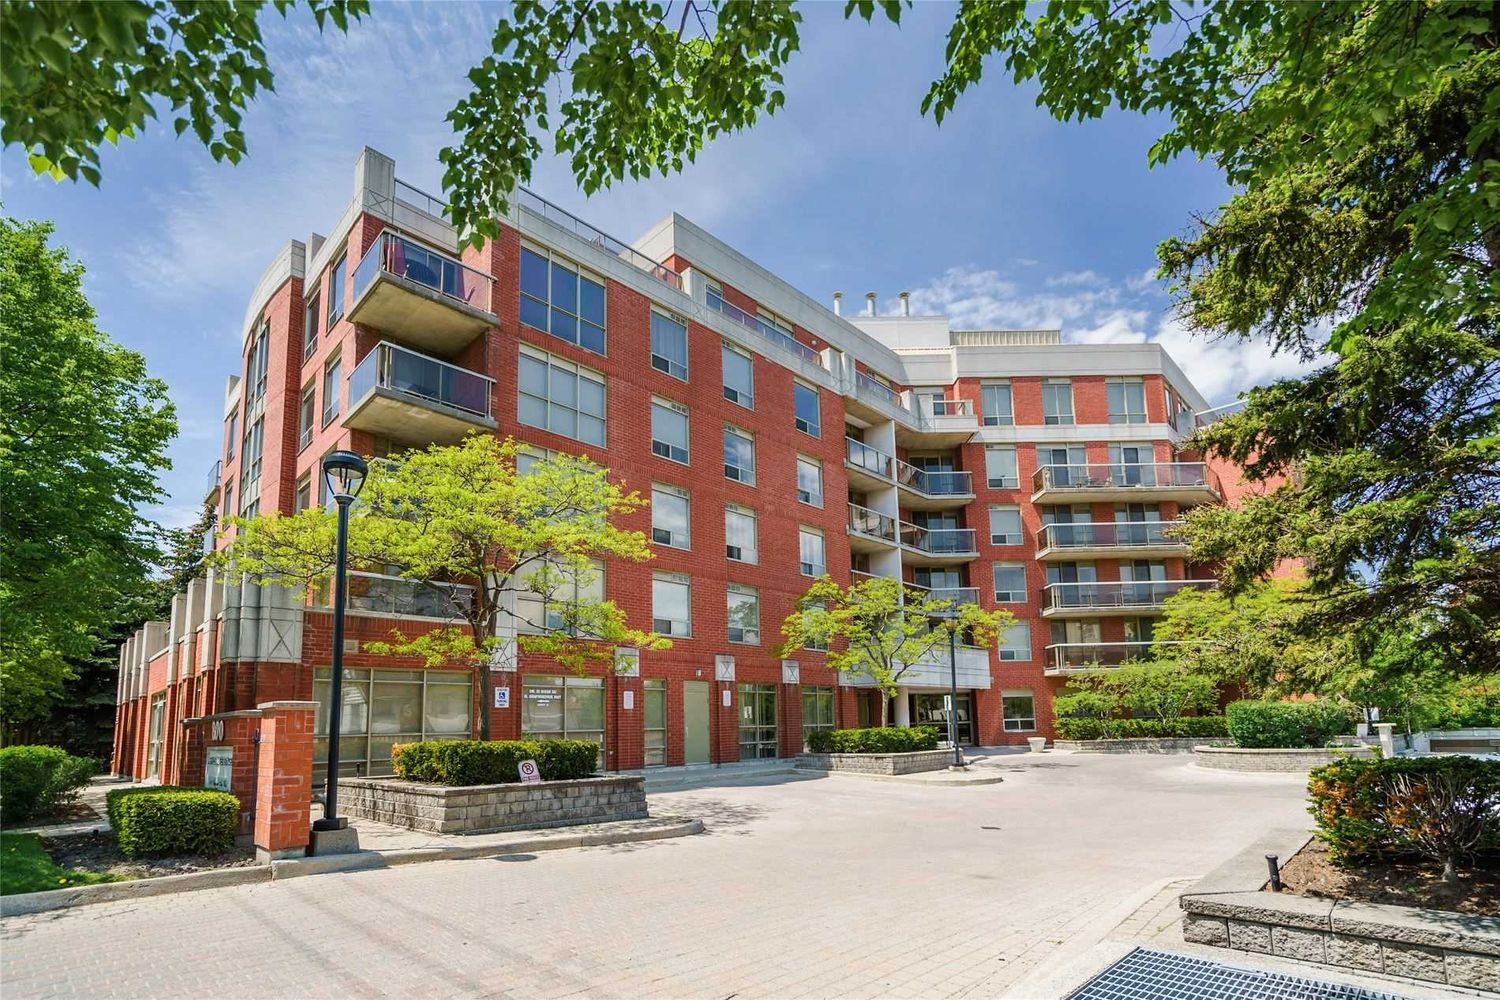 800 Sheppard Avenue W. Ashlea Terrace Condos is located in  North York, Toronto - image #1 of 2